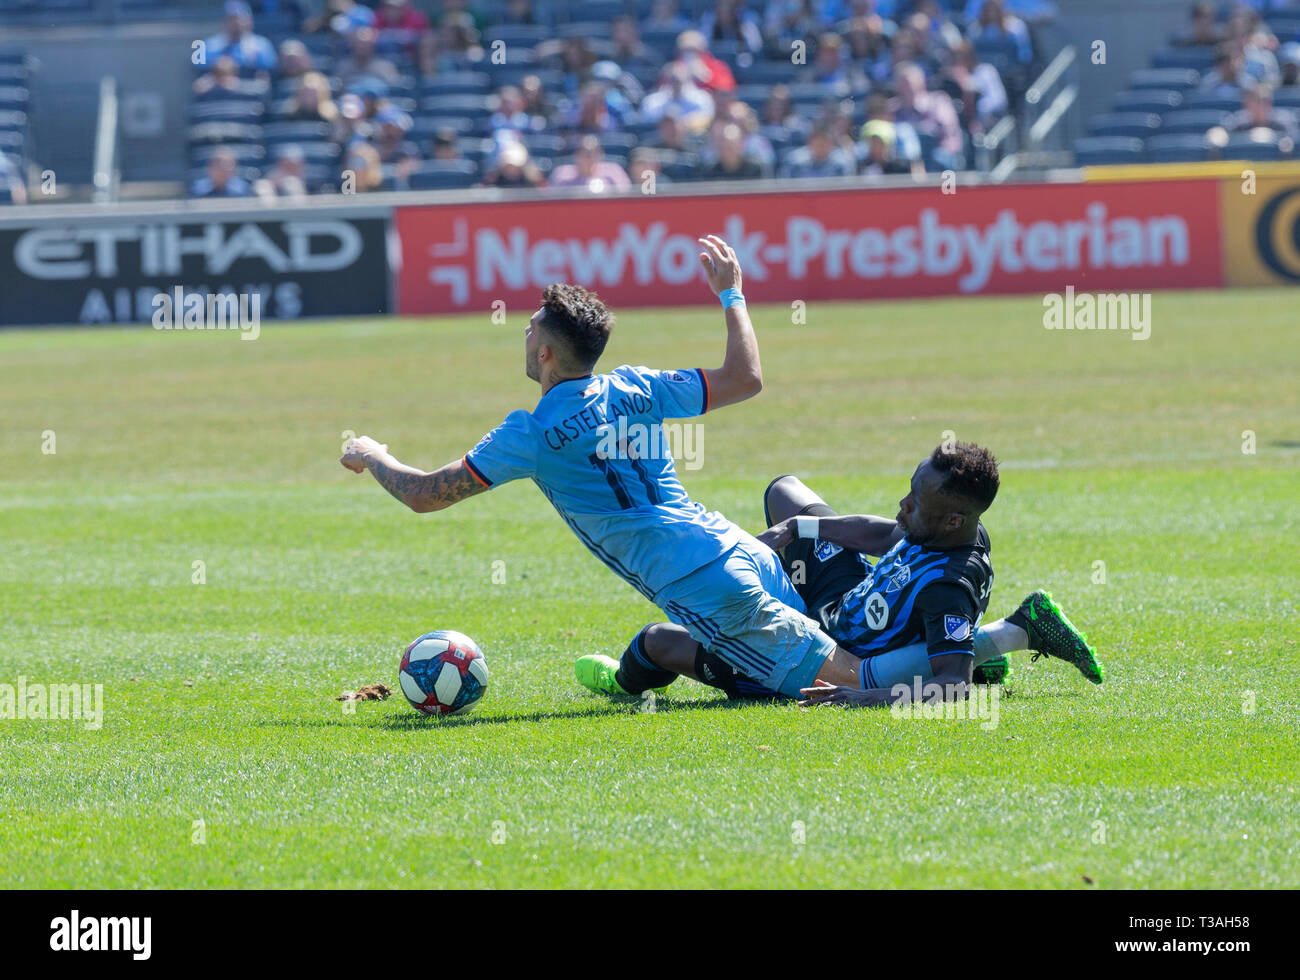 New York, NY - April 6, 2019: Valentin Castellanos (11) of NYCFC collides with Bacary Sagna (33) of Montreal Impact during regular MLS game at Yankee stadium Stock Photo